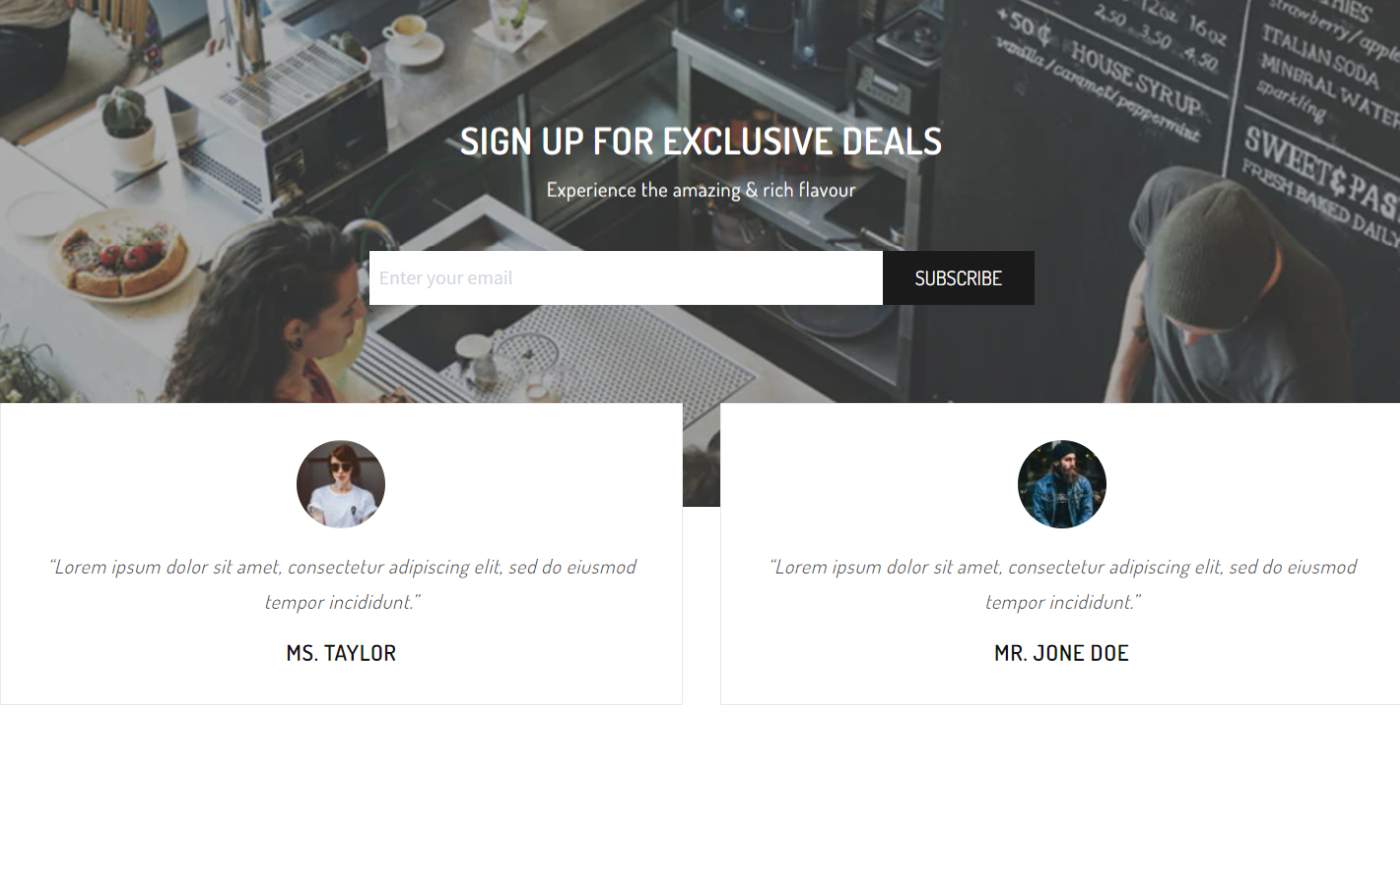 Coffeetify - Coffee Shopify template built by Pagefly